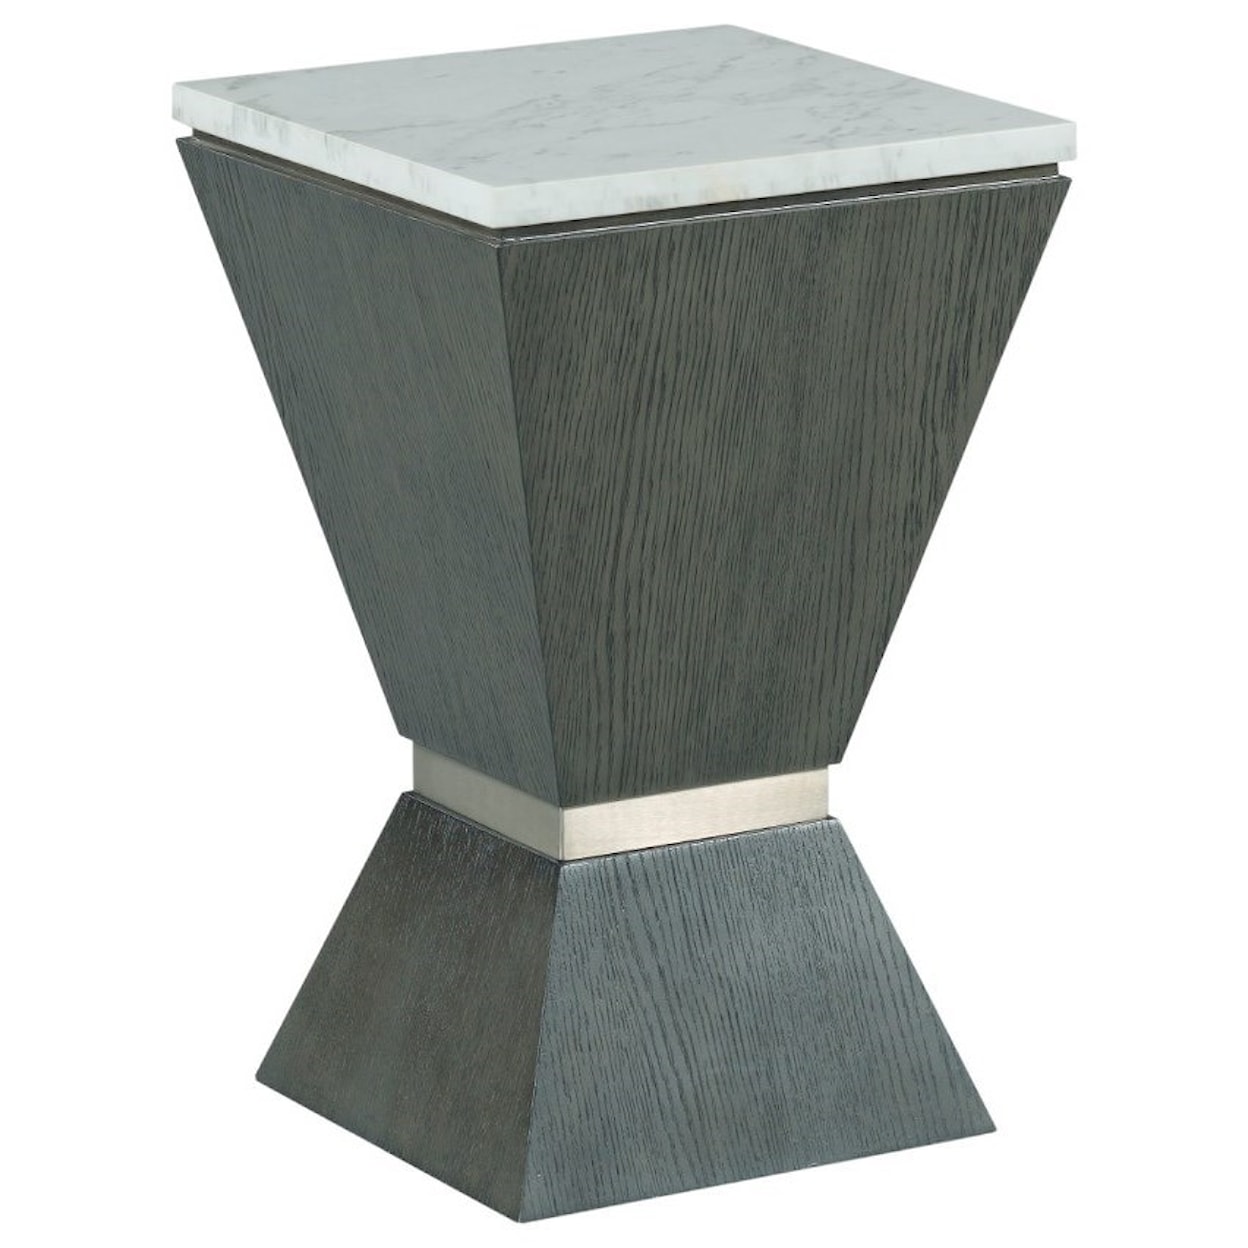 Hammary Prelude Chairside Table